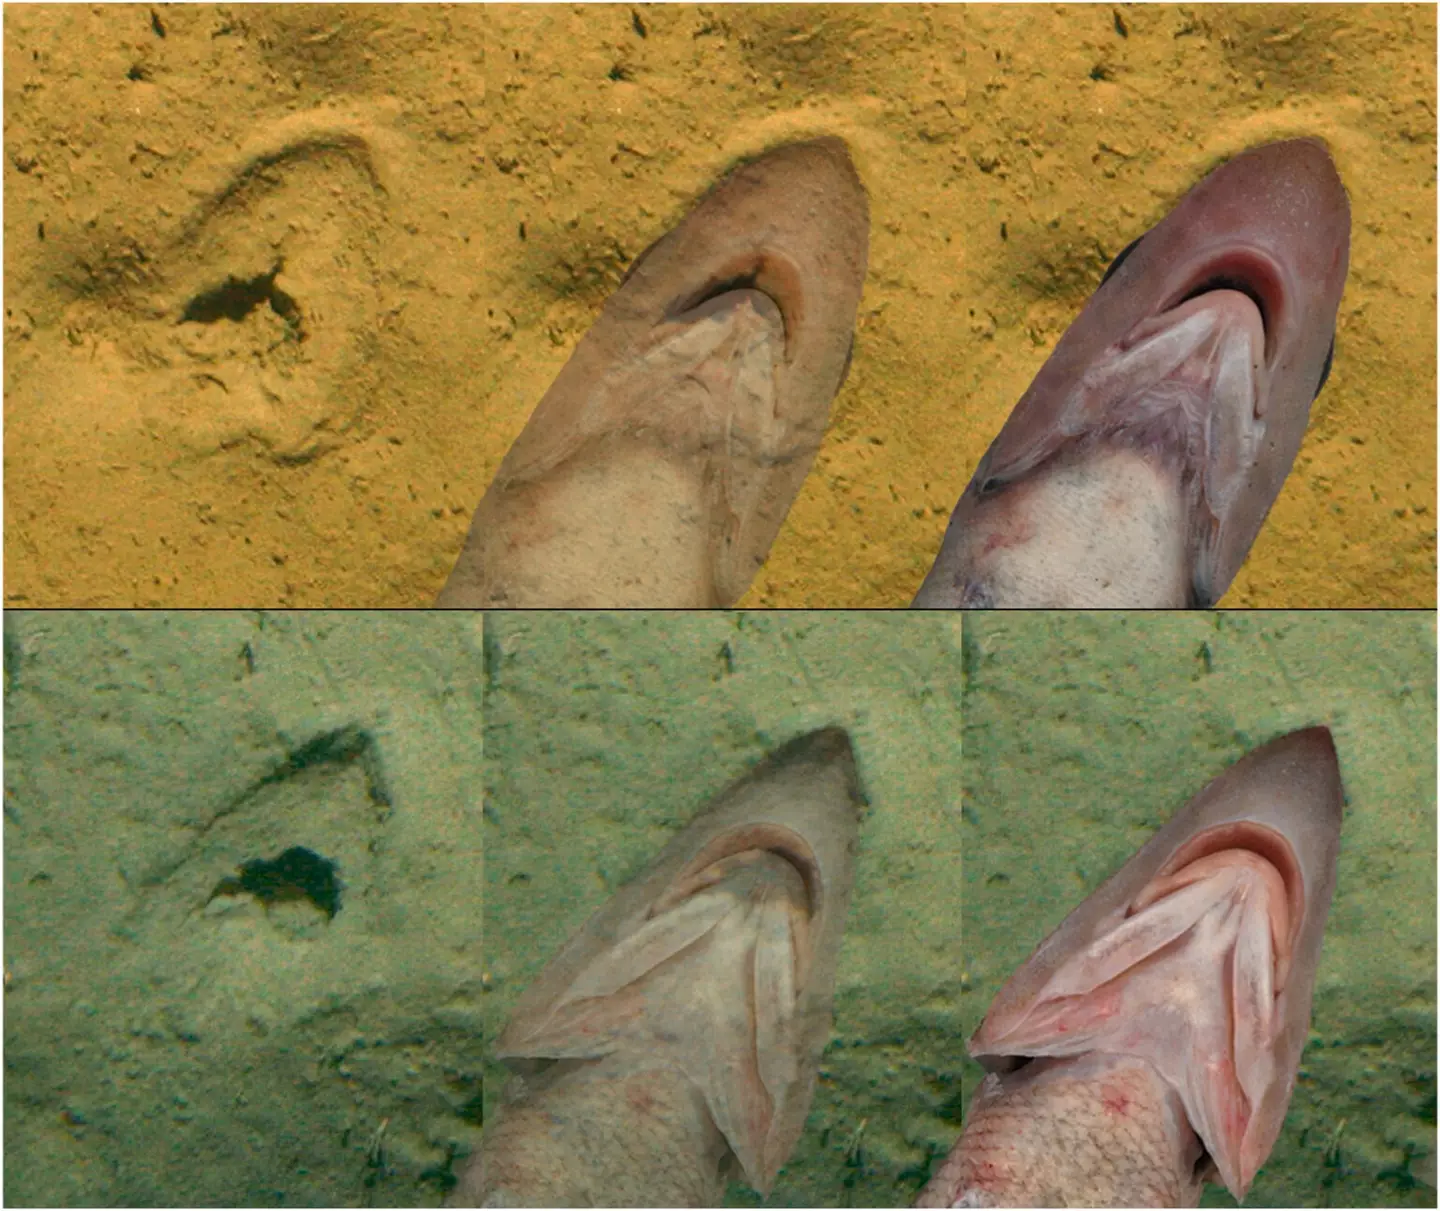 Scientists believe the marks were caused by grenadier fish.